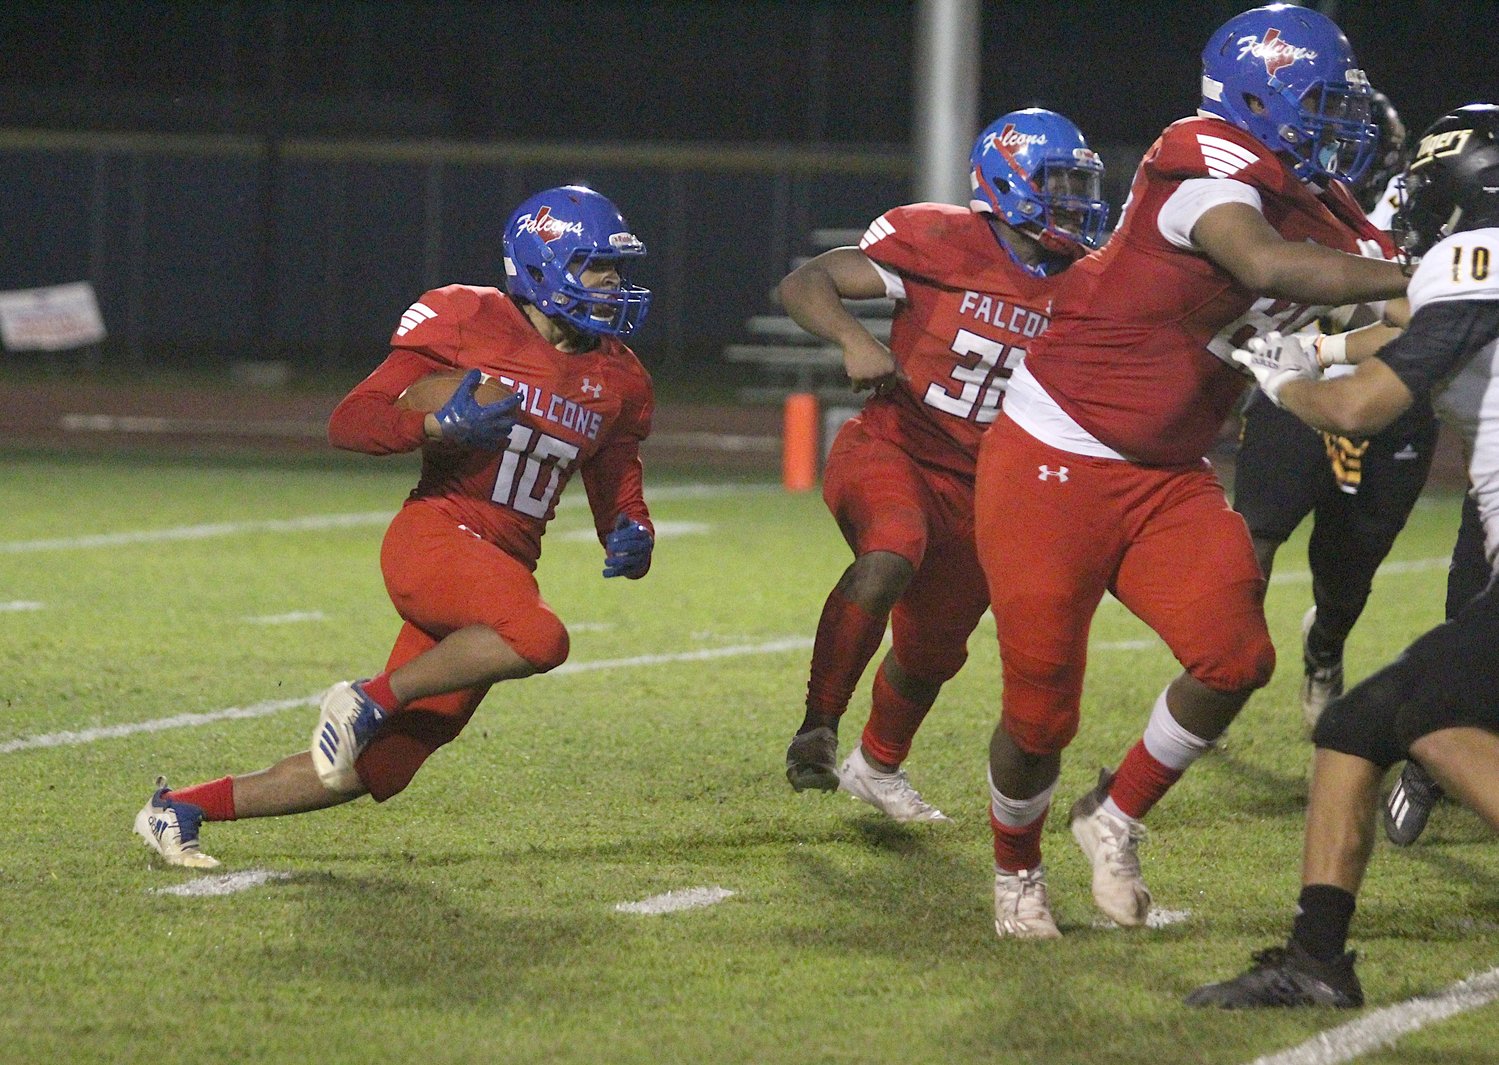 Falcon sophomore running back Derrick Gates hits the line against Sealy in the first district game of the season on Oct. 9, 2020 in Brookshire. Gates caught Royal’s lone score from quarterback Andre Prophet in the fourth quarter.